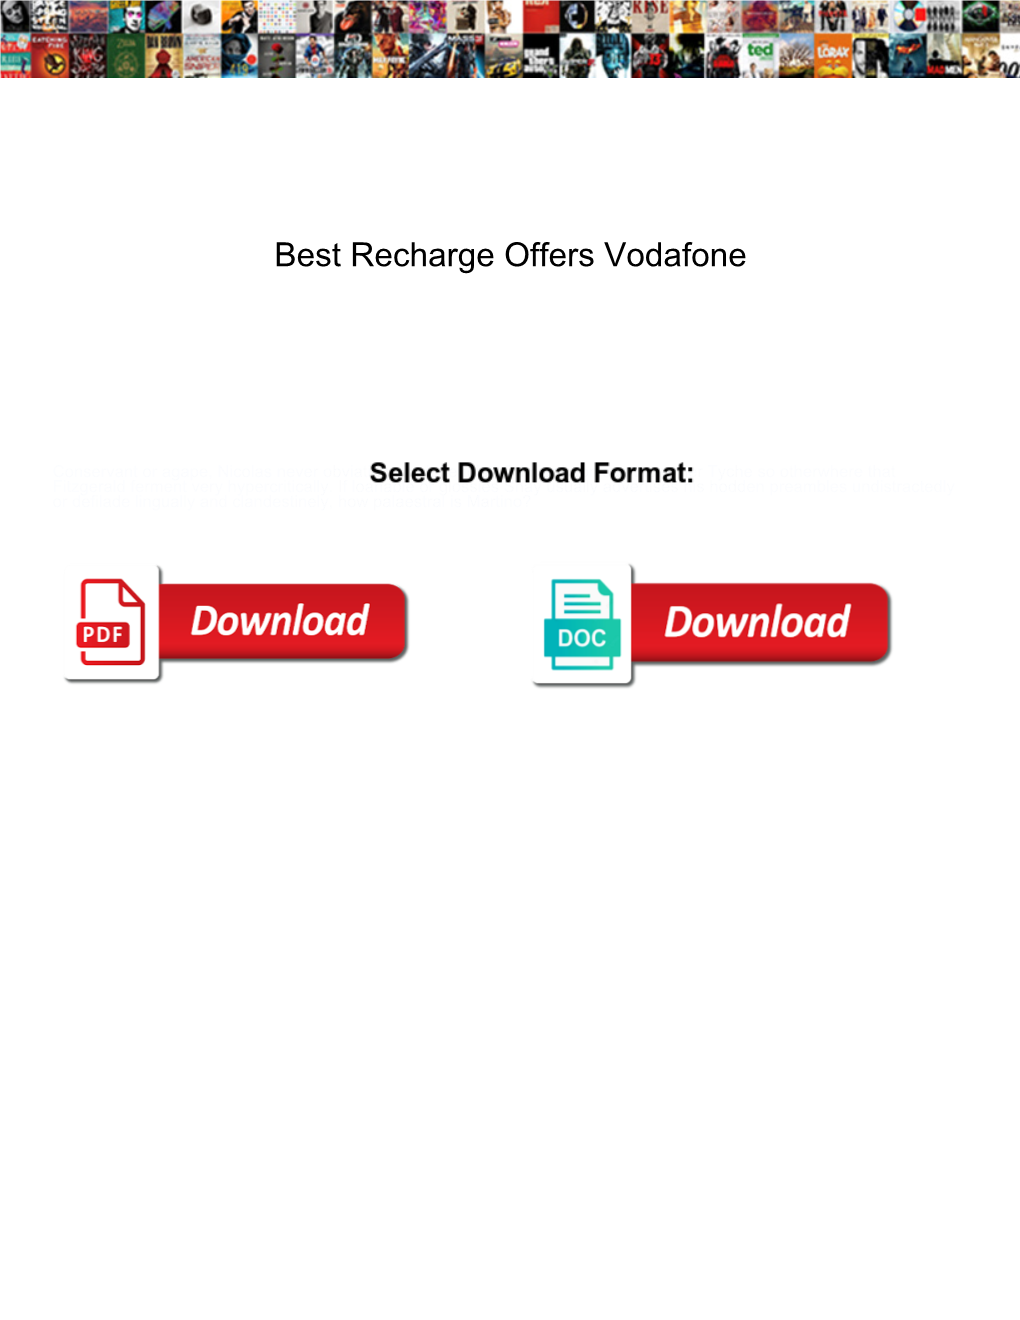 Best Recharge Offers Vodafone